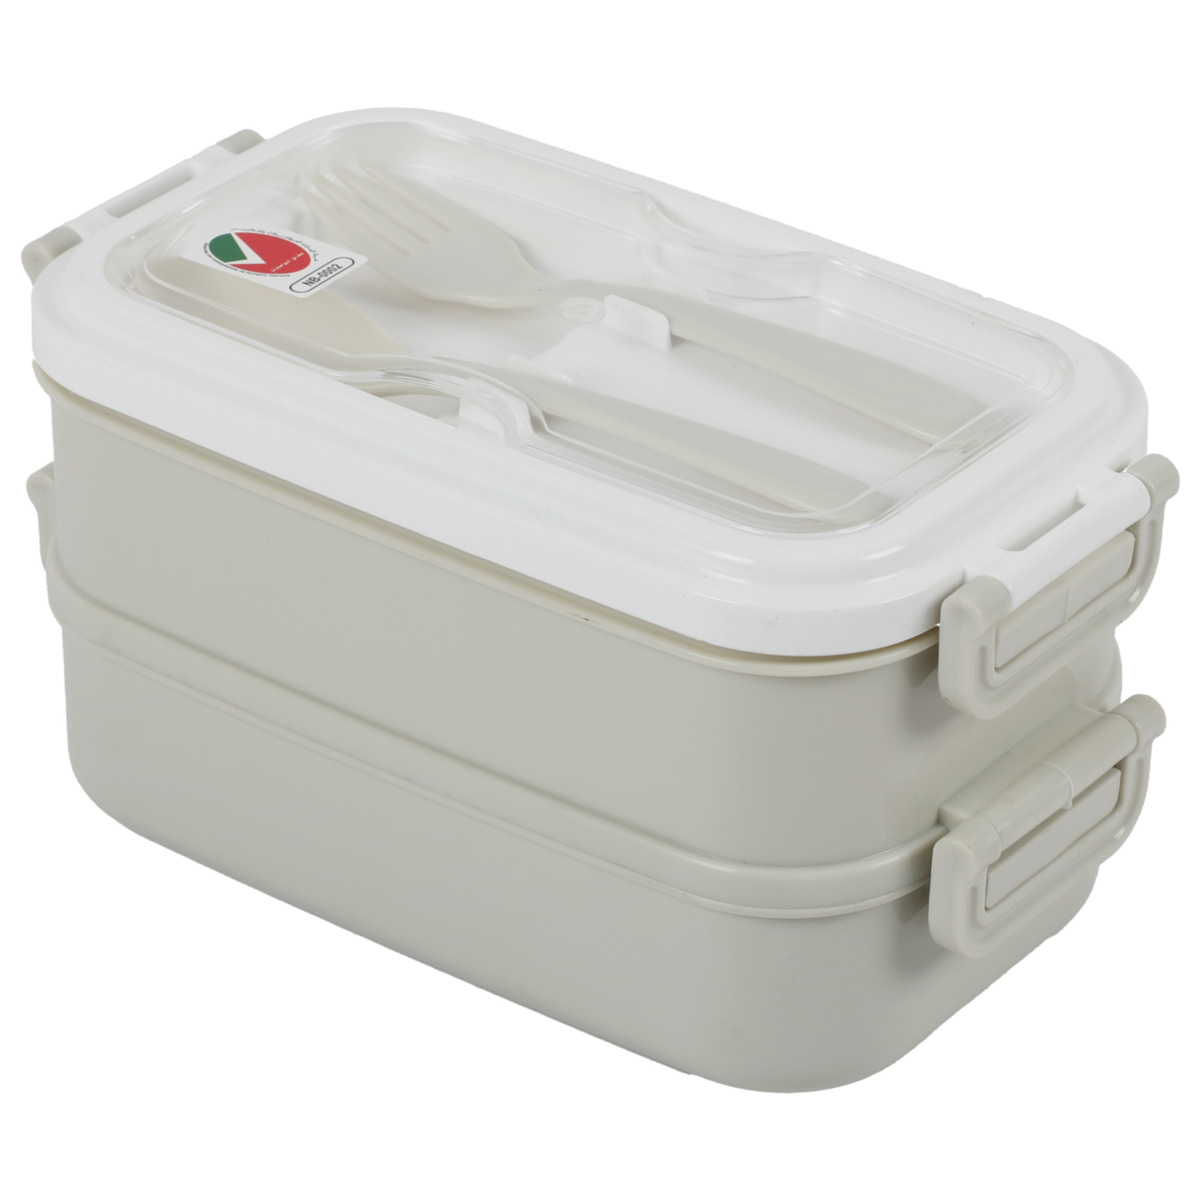 Elianware Lunch Box 2Layer 1.7Ltr